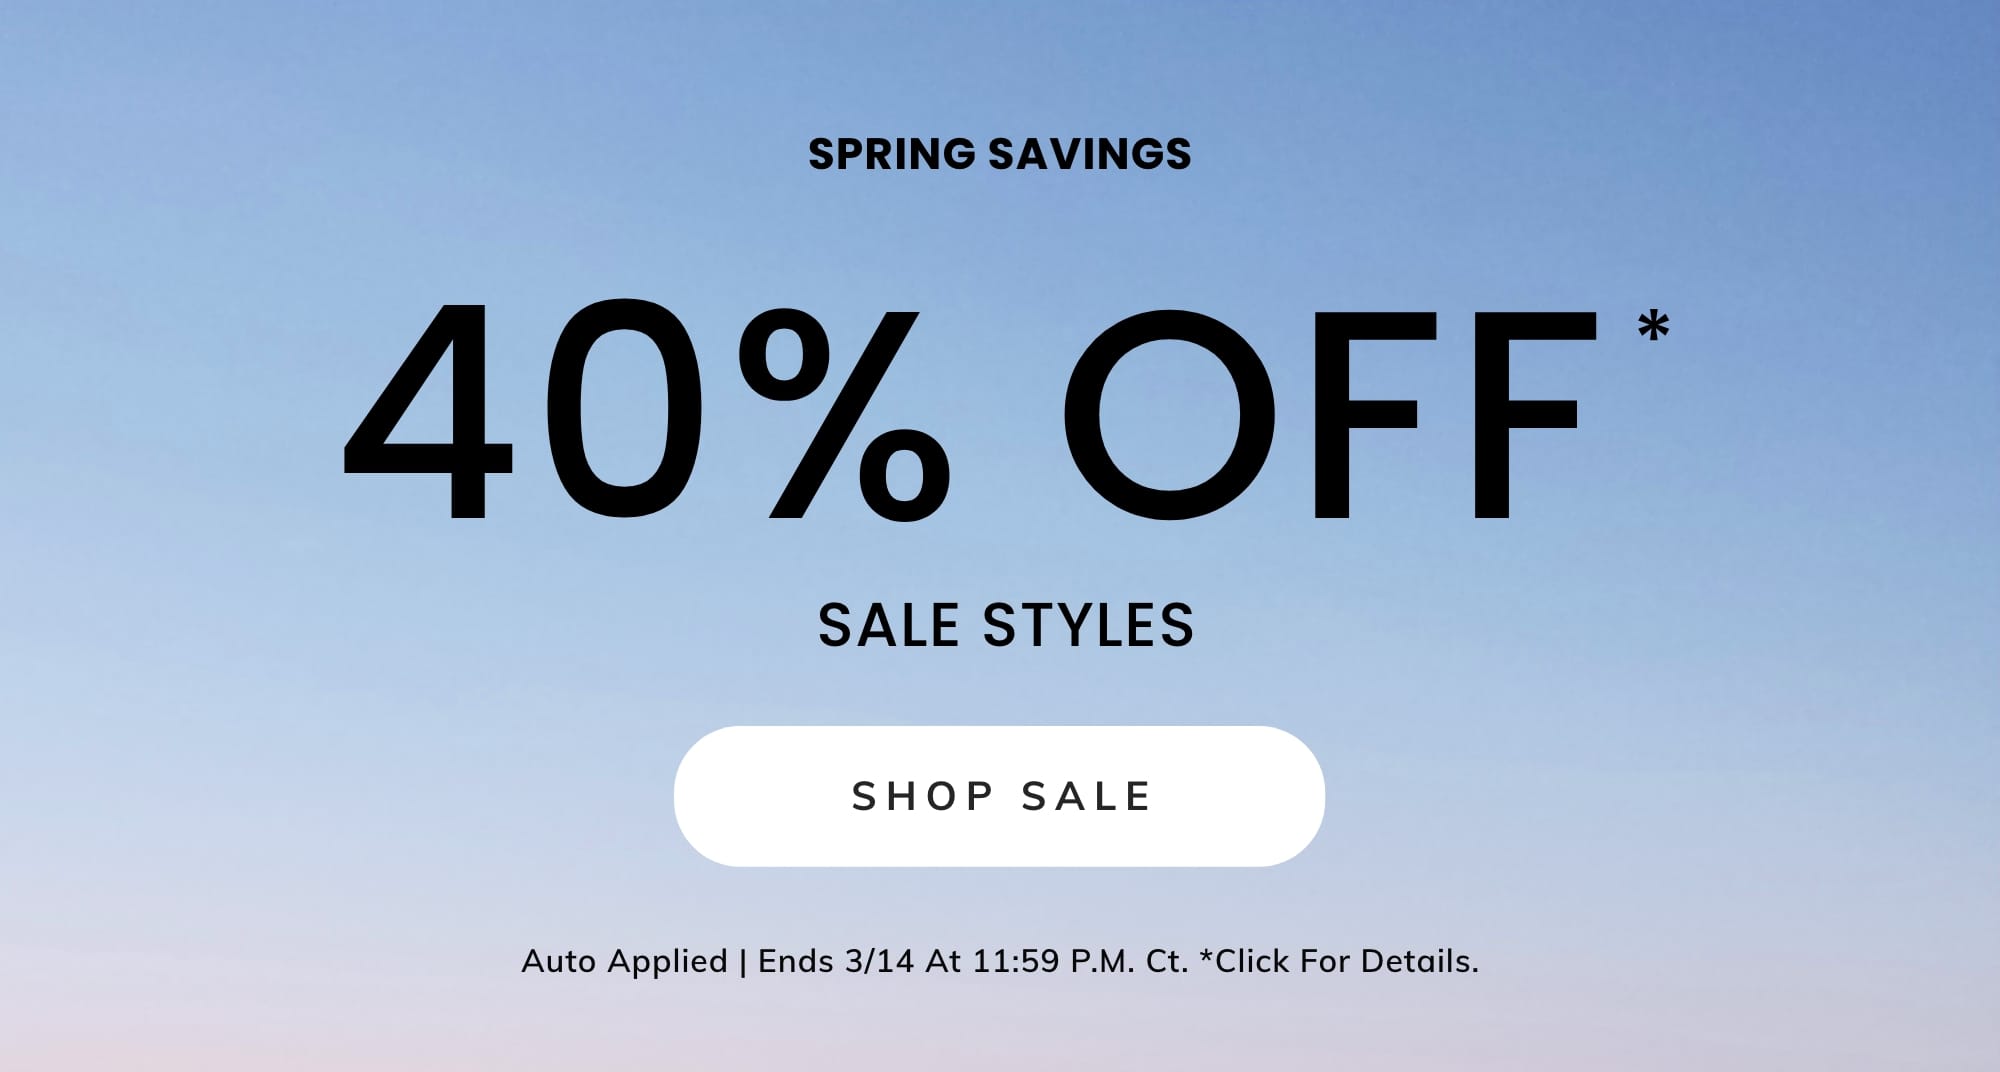 40% OFF* SALE STYLES